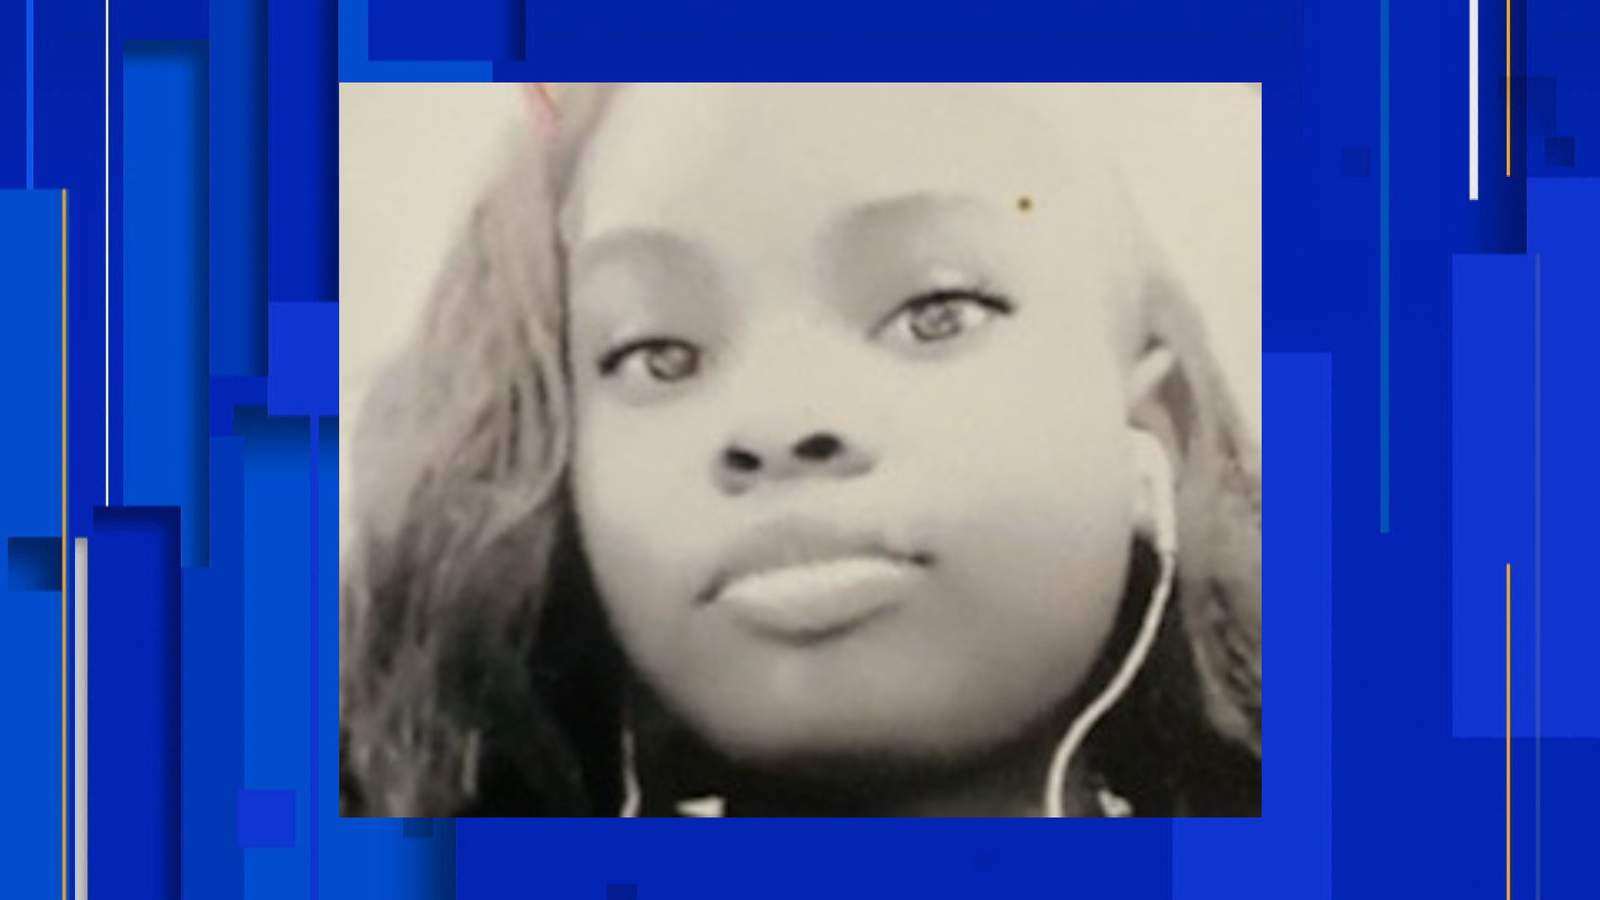 Detroit police search for missing 15-year-old